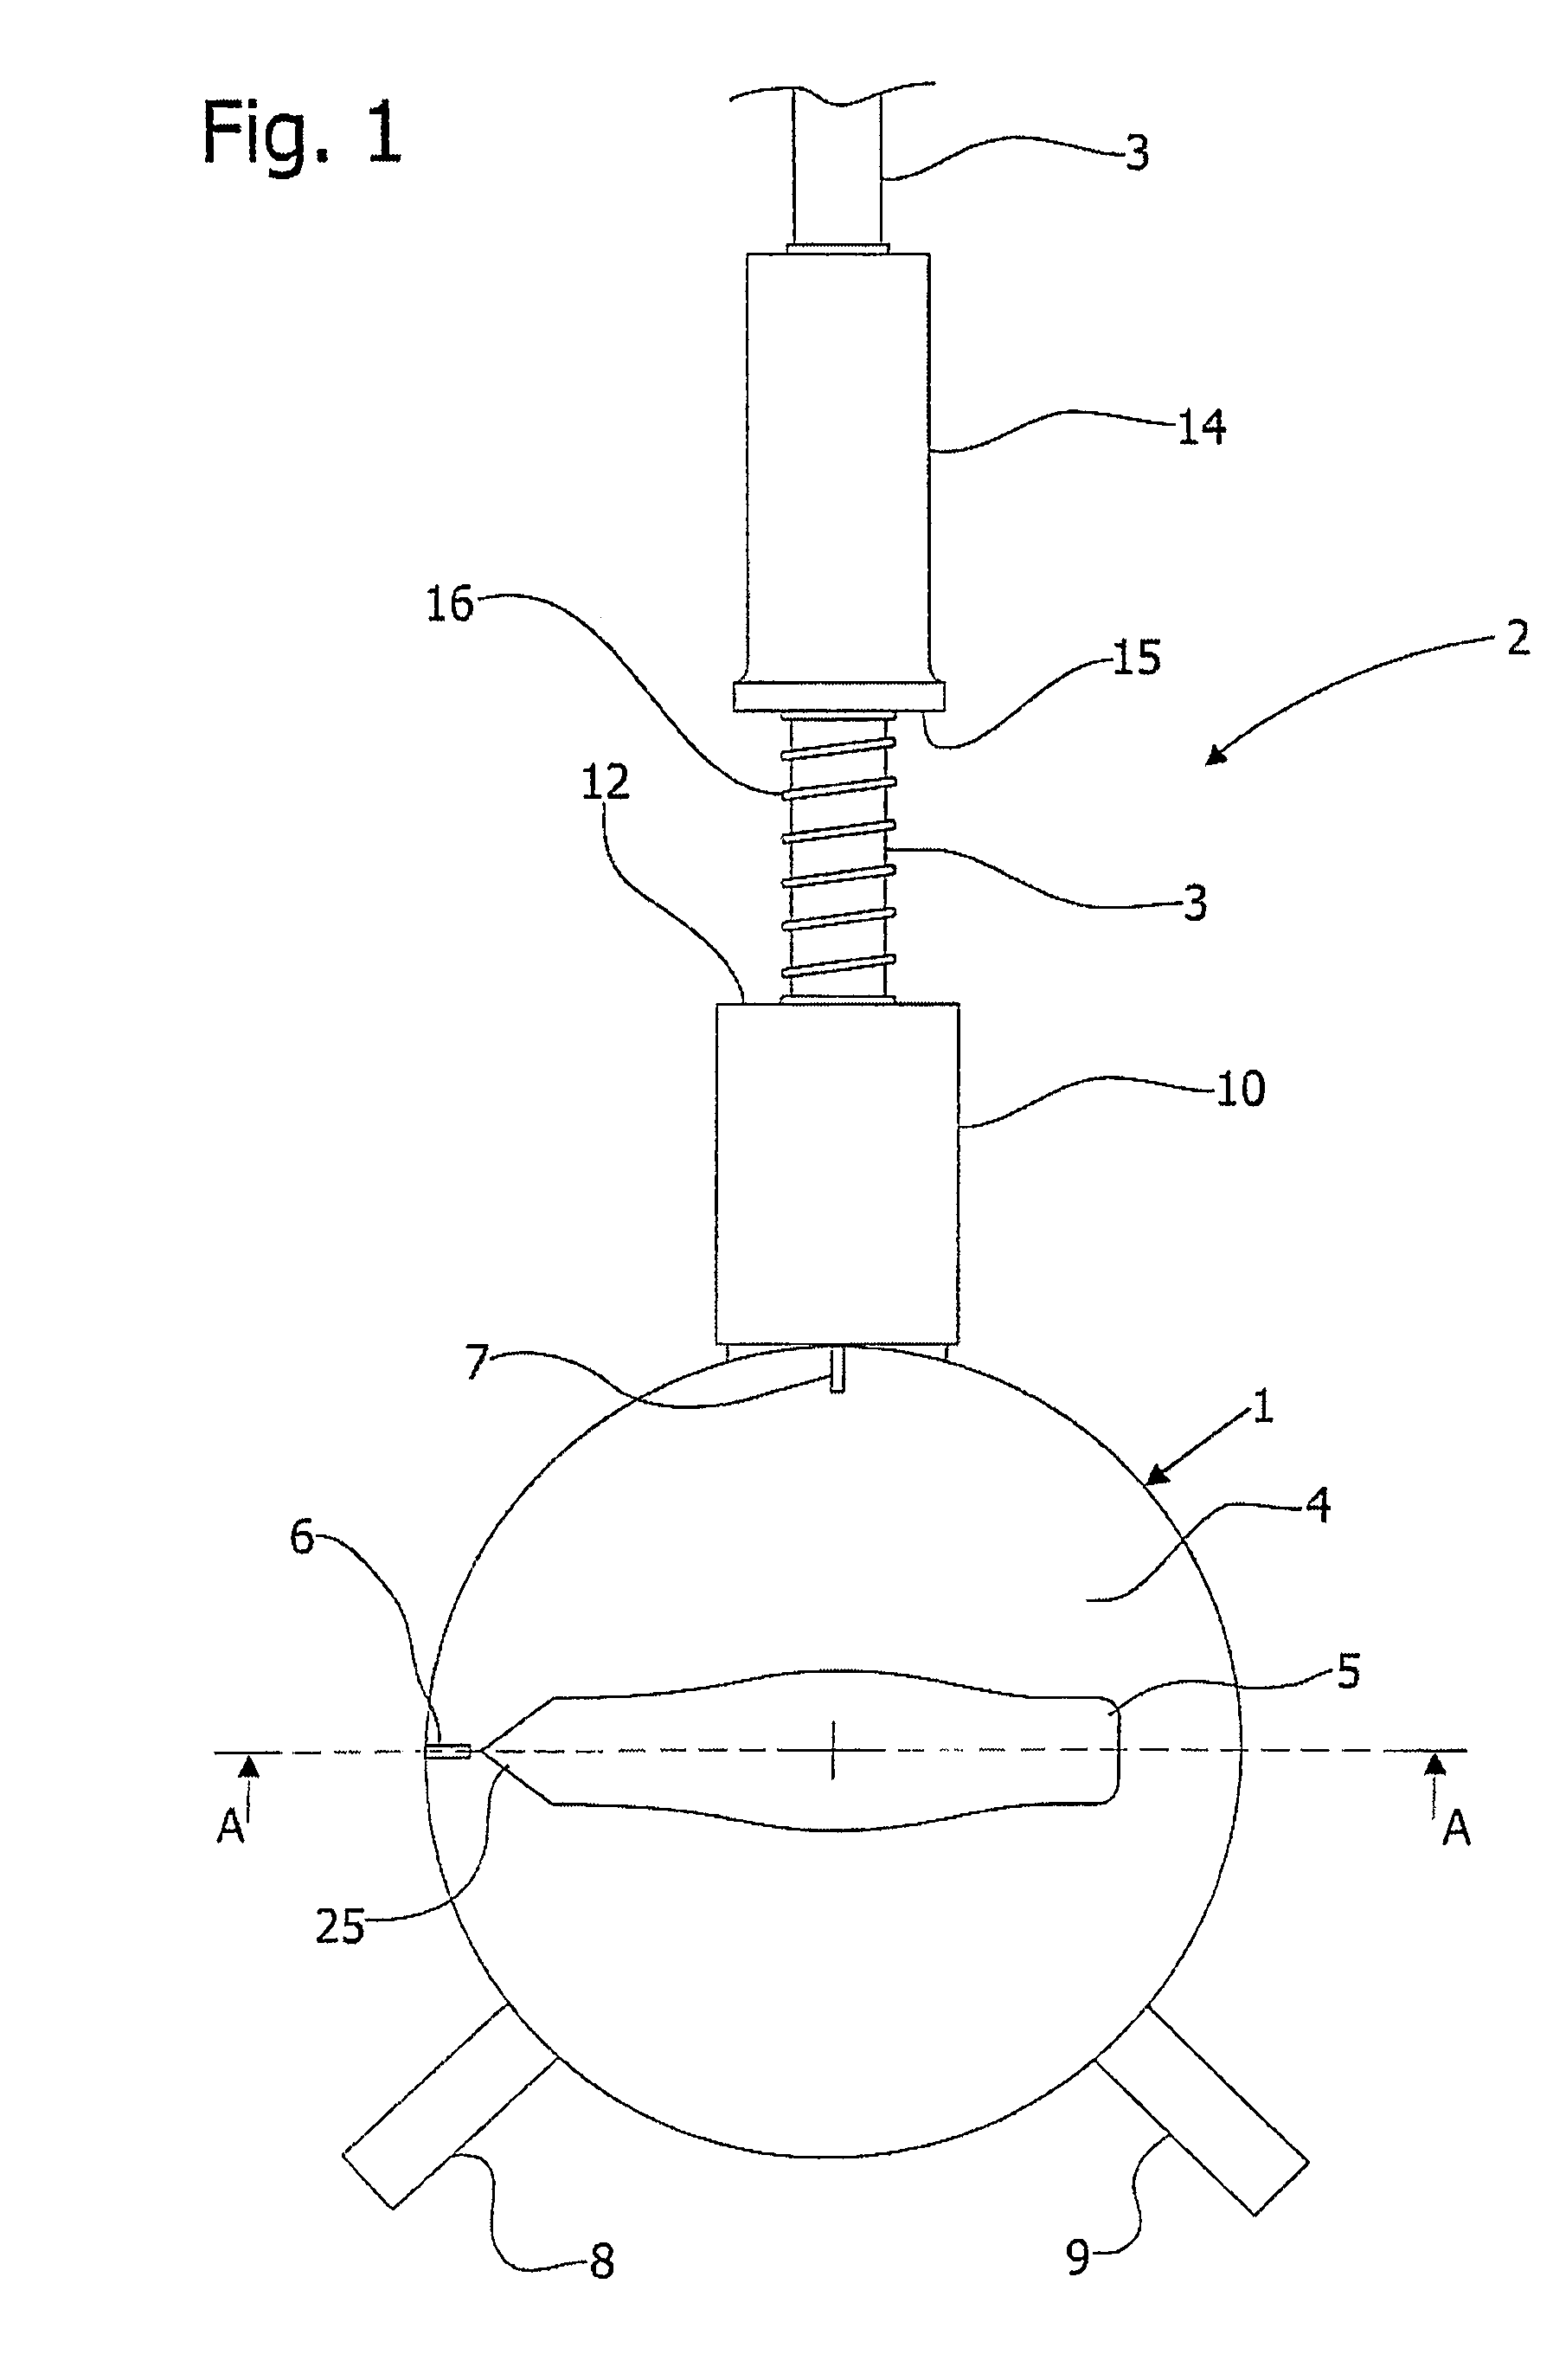 Apparatus for applying and removing closing means from an end portion of a tubular element and the use thereof in peritoneal dialysis